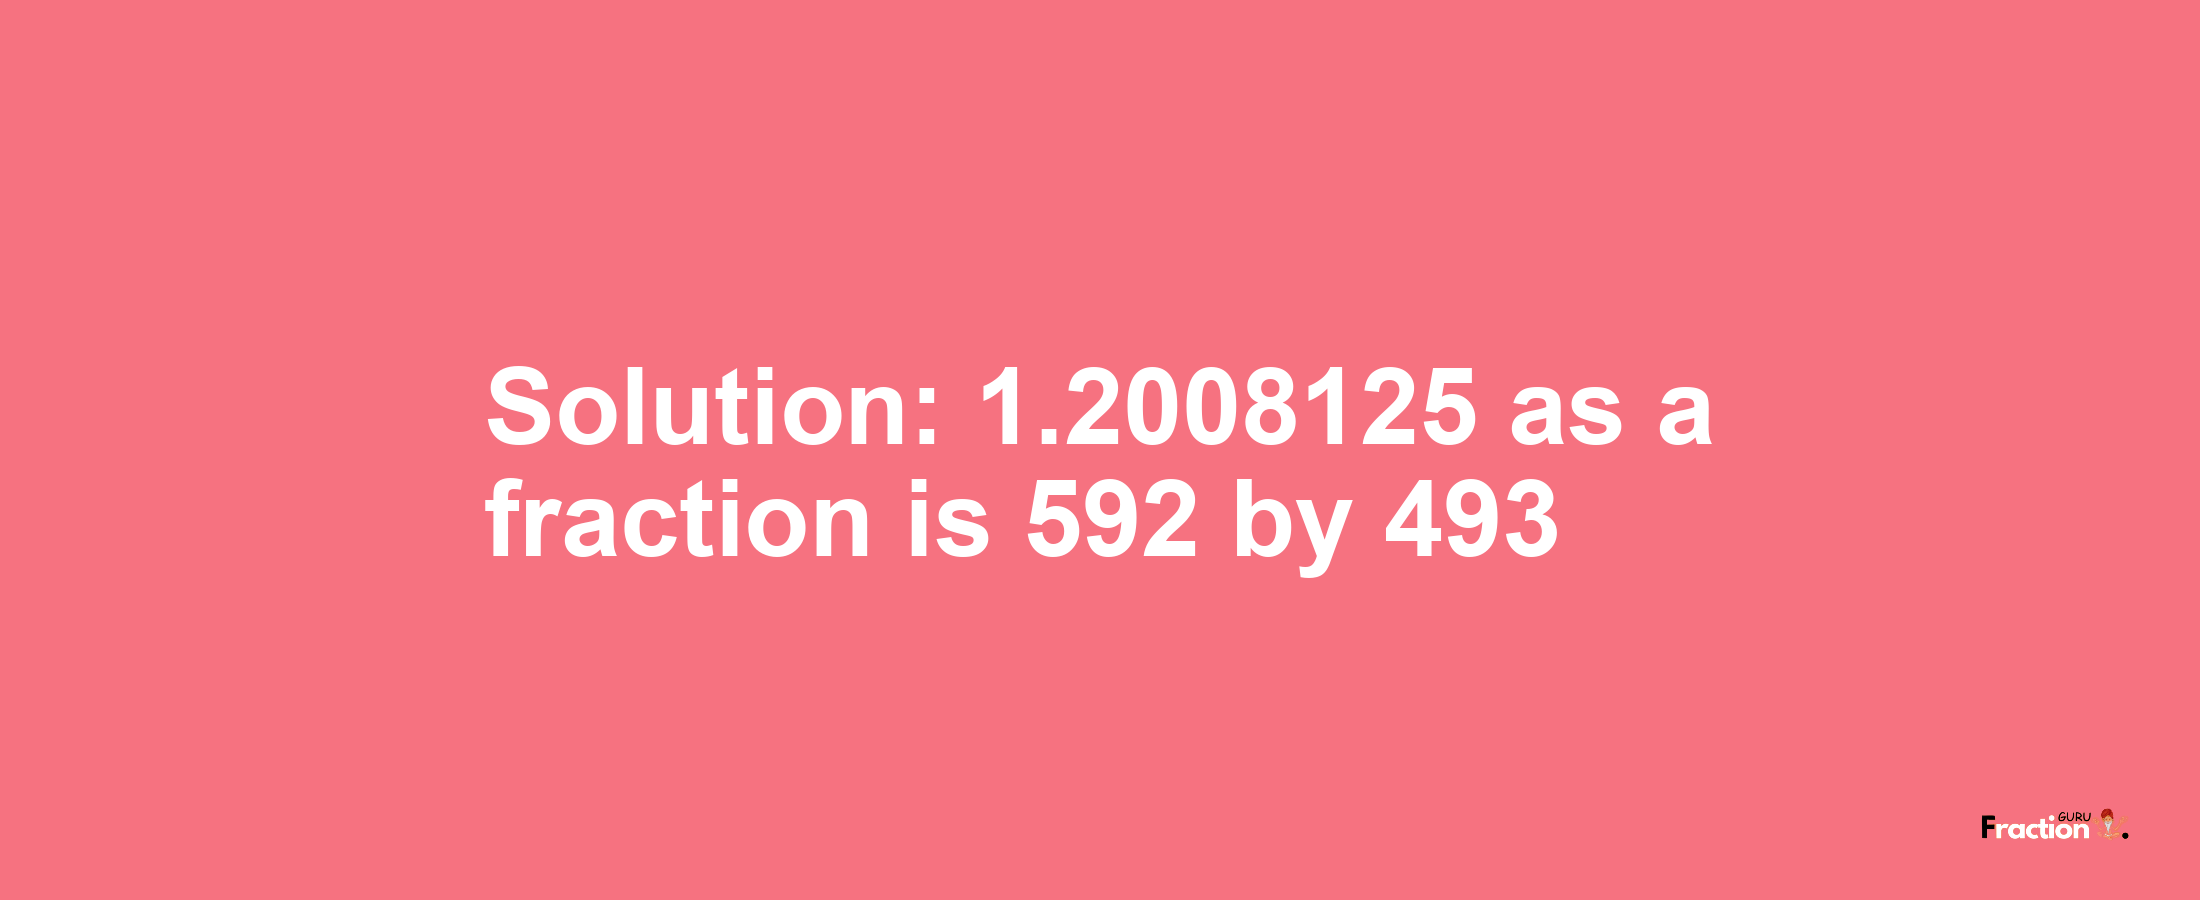 Solution:1.2008125 as a fraction is 592/493